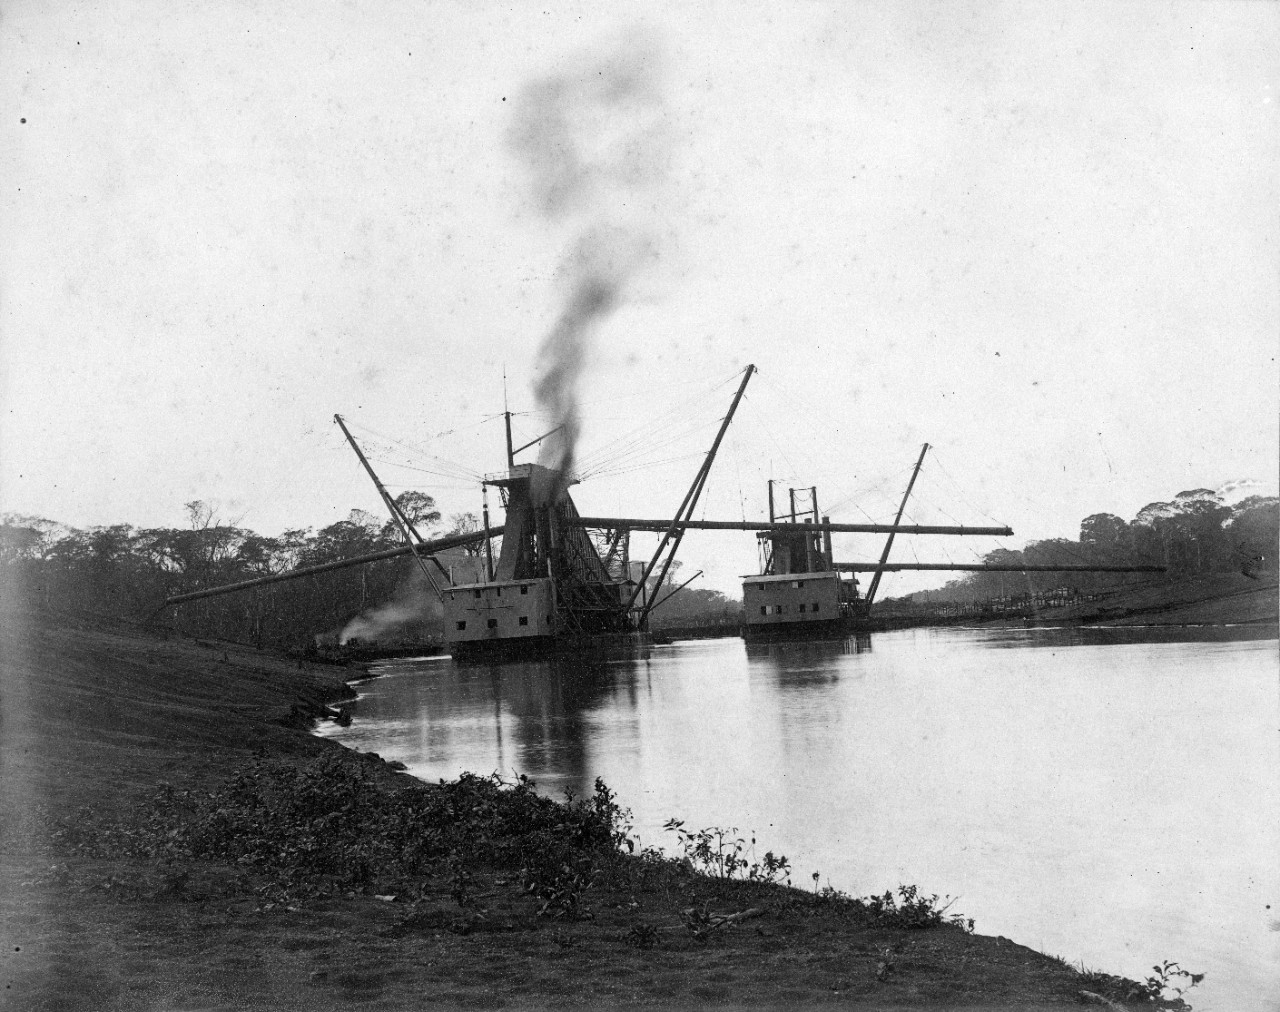 22 oversize photos, mounted on cardboard, showing construction of the failed Nicaragua Canal, circa 1890. Views of clearing of land, and extensive views of dredges and dredging operations. Views of Managua, and buildings near the operation.